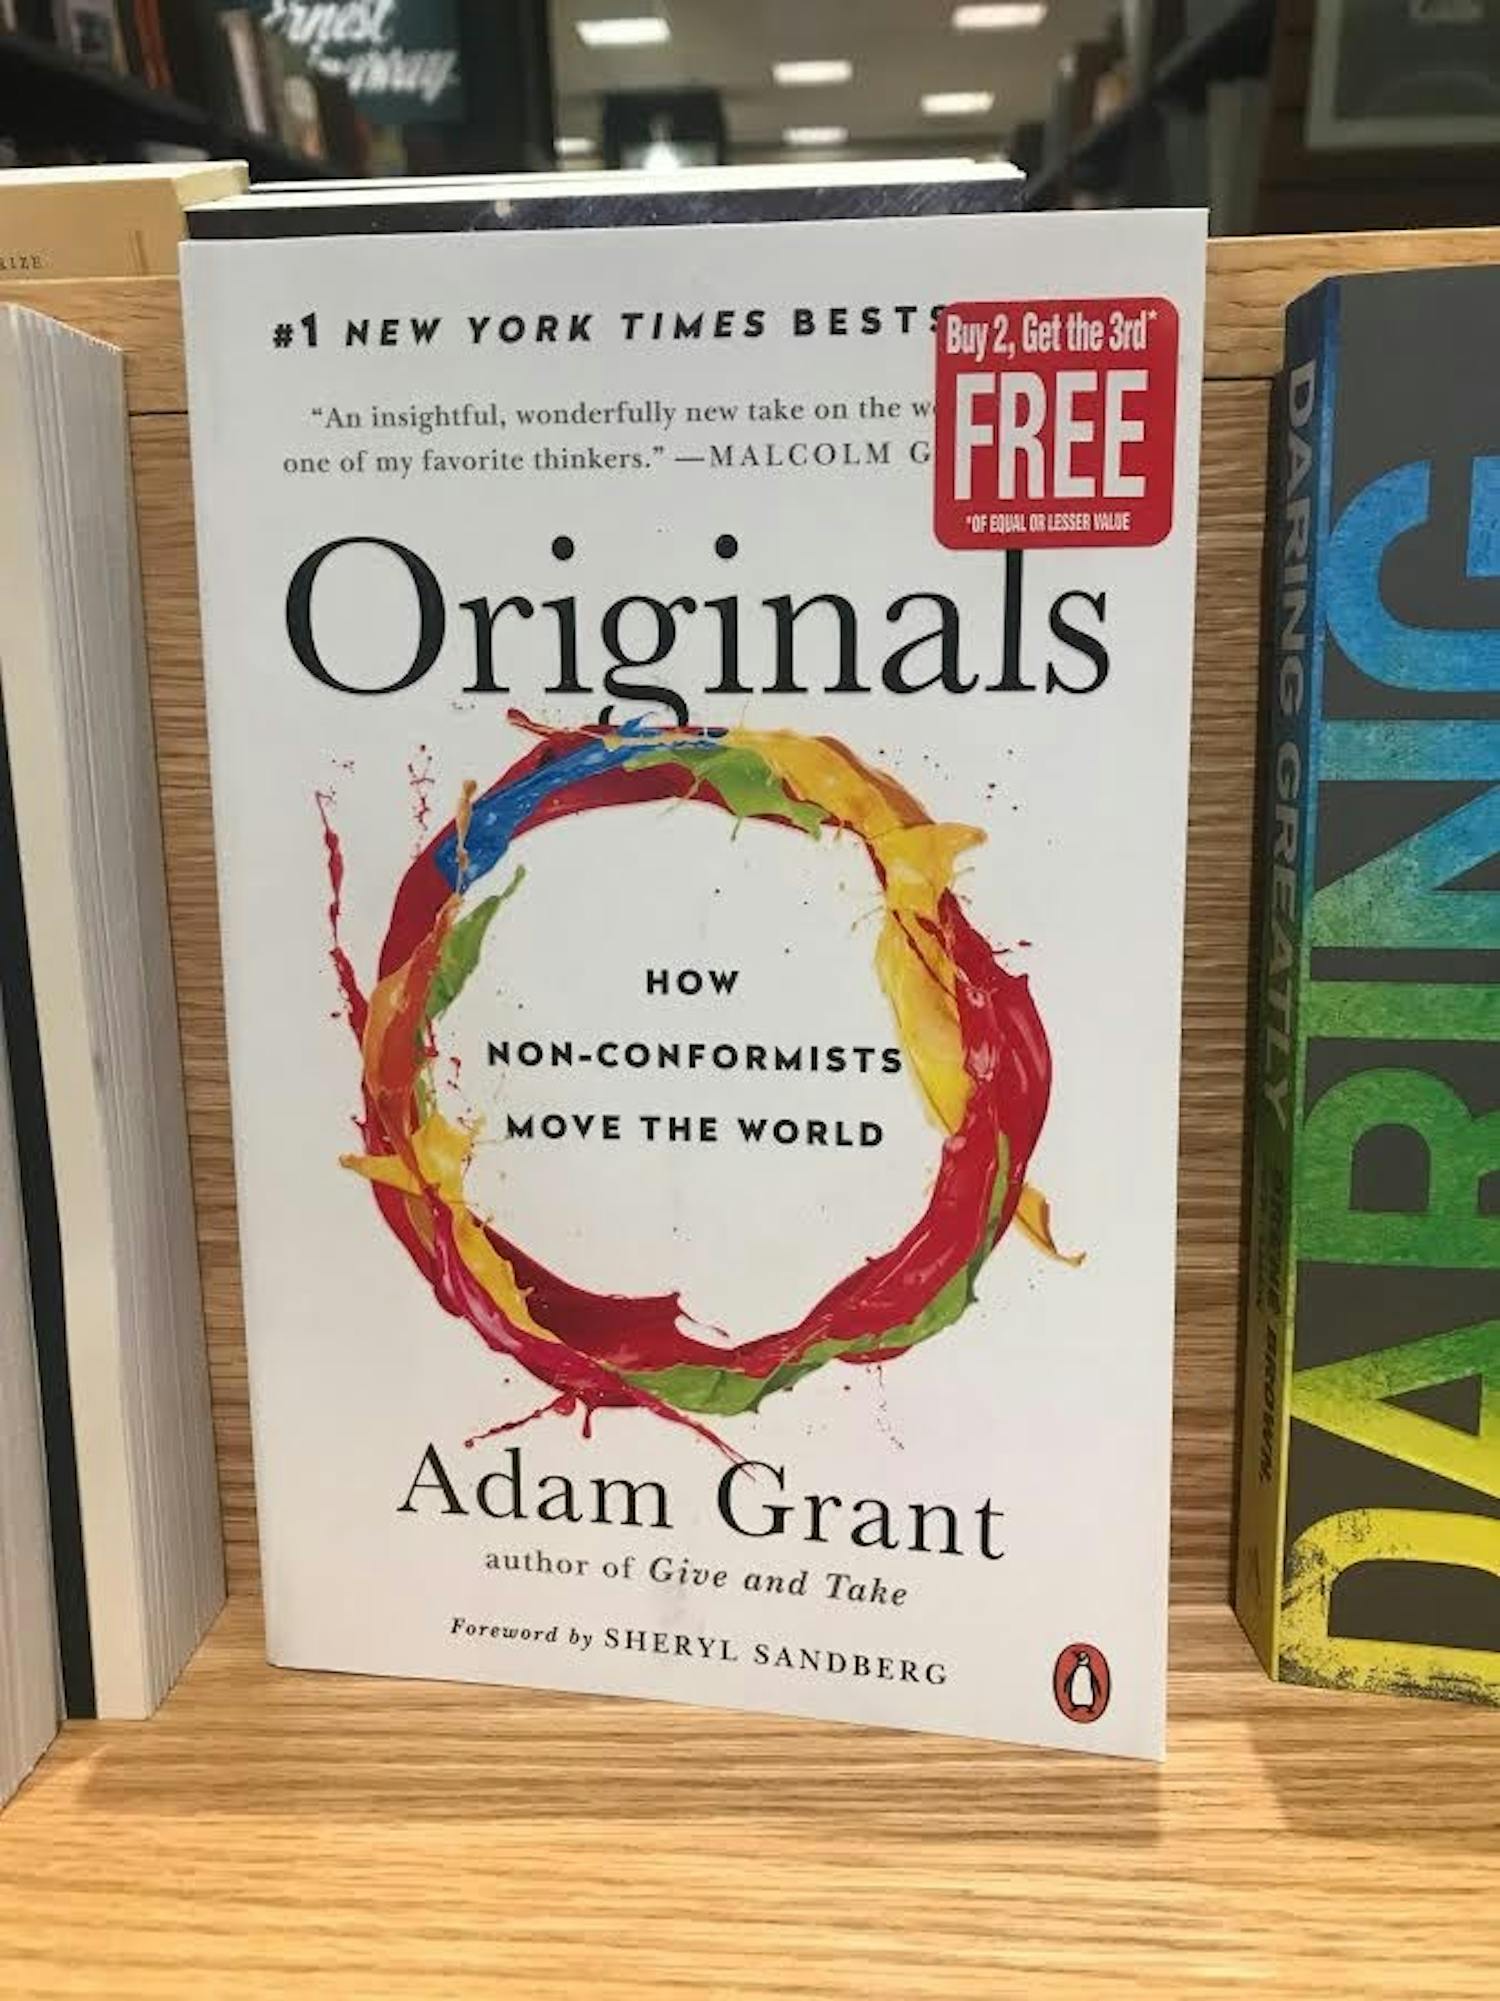 "Originals" by Adam Lee is a #1 New York Times Best Seller. It was originally published on Feb. 2, 2016.